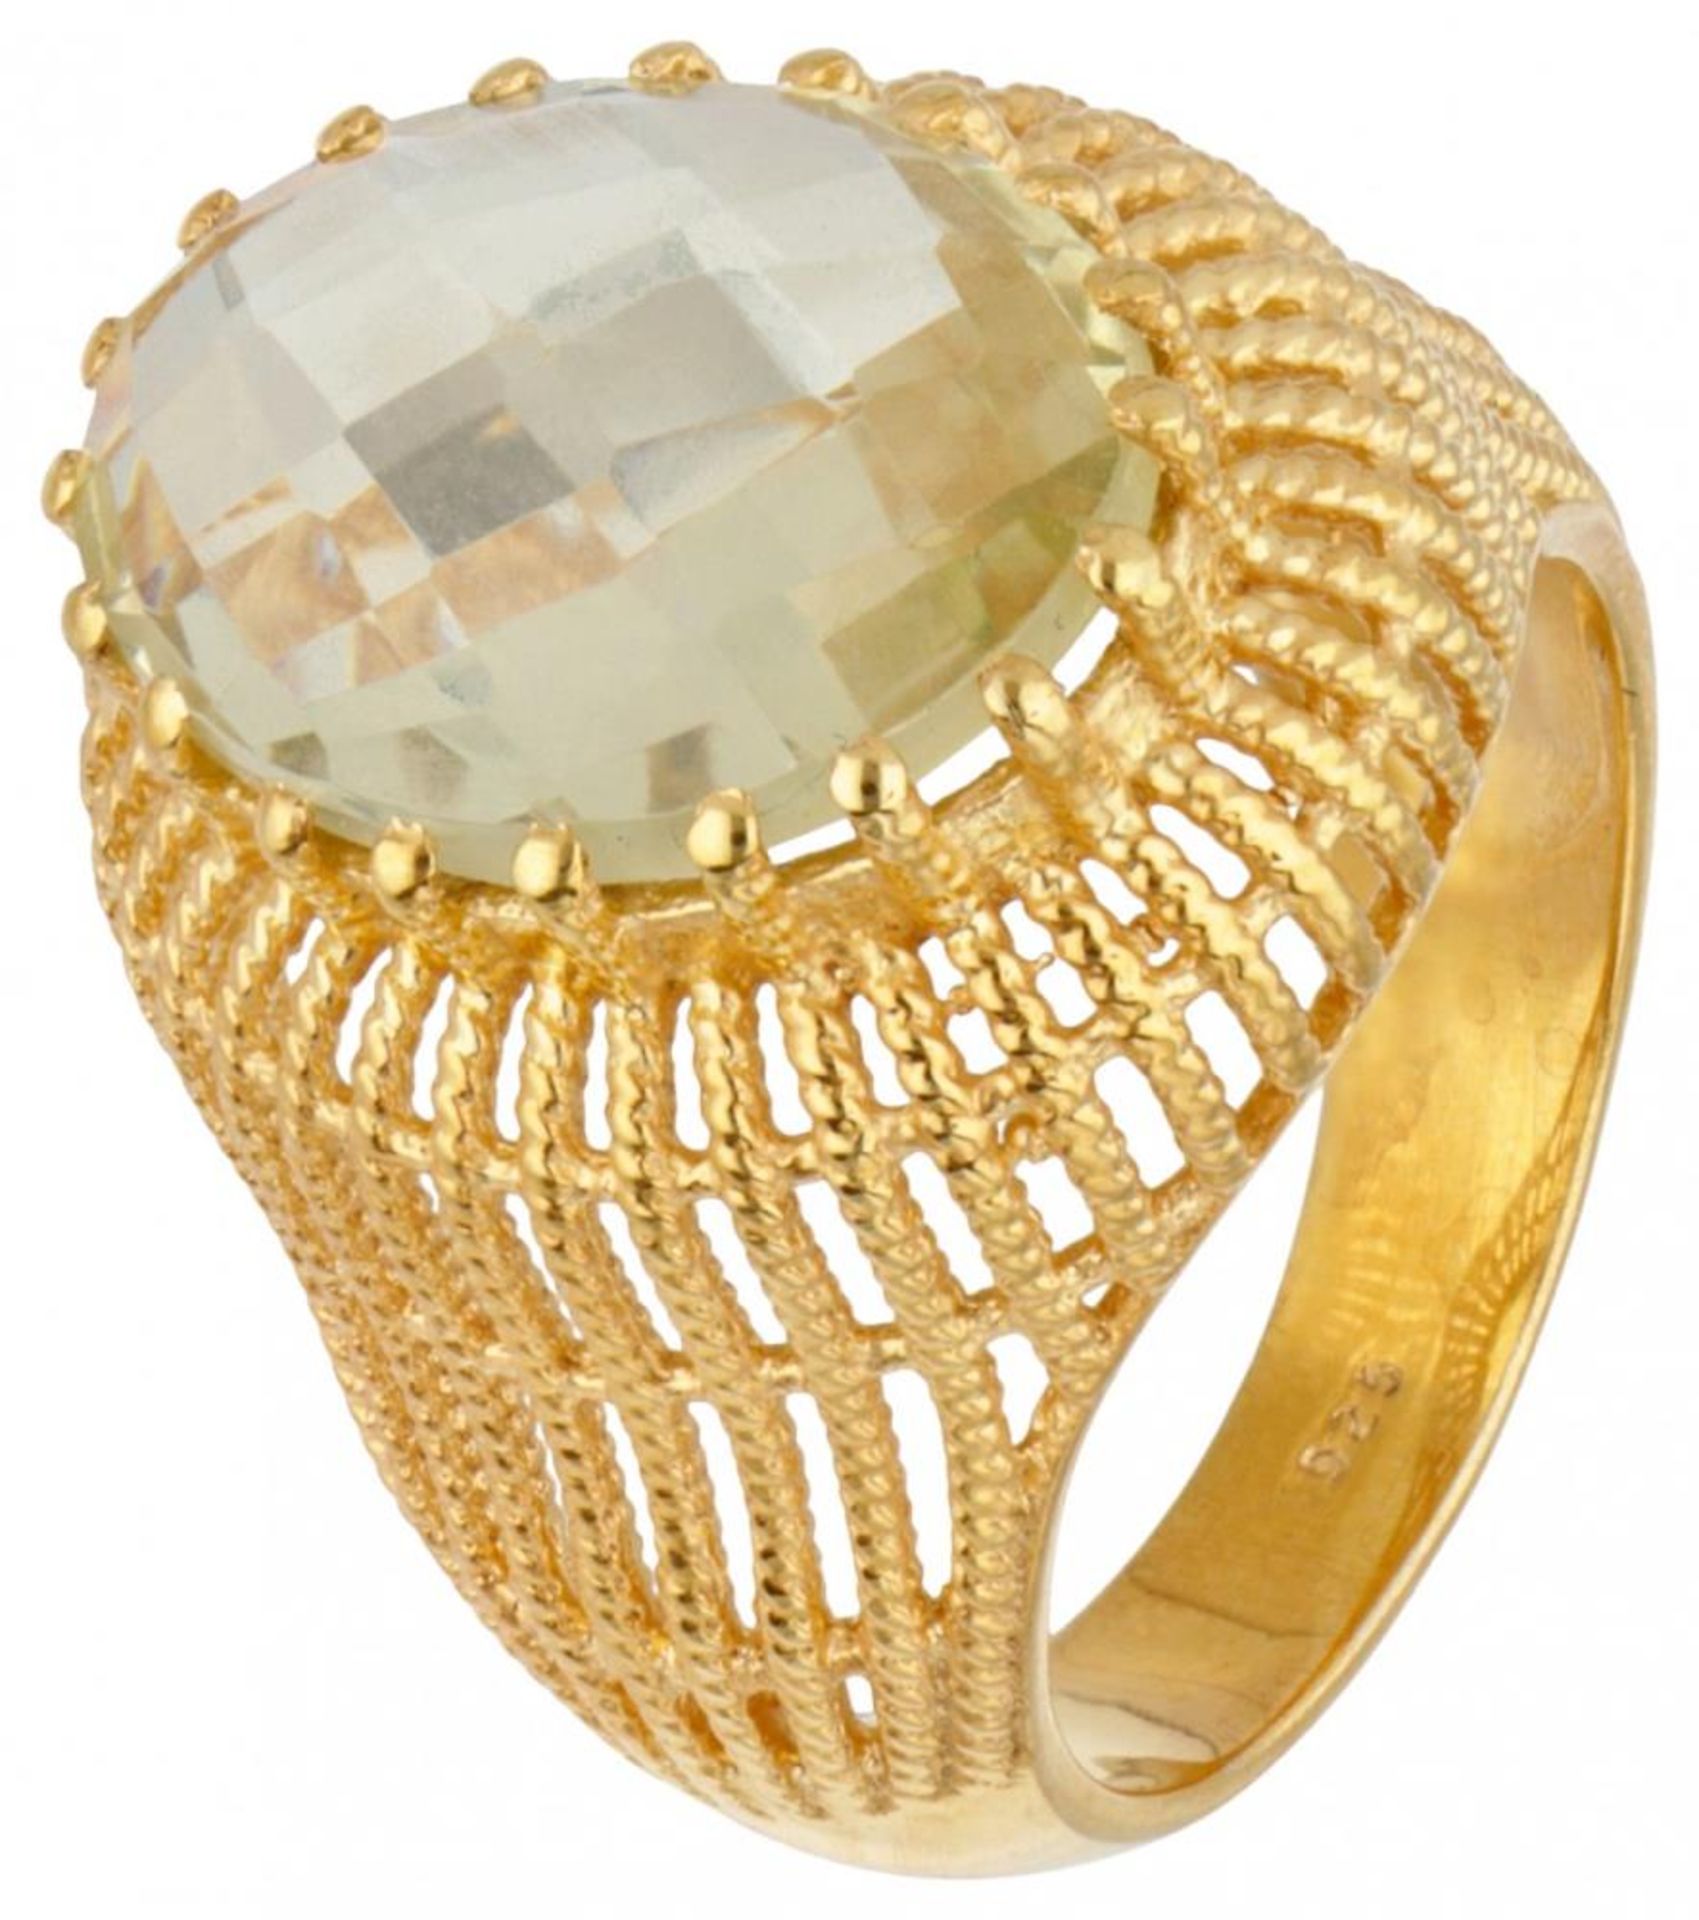 Gold plated silver ring set with approx. 5.98 ct. lemon quartz - 925/1000.